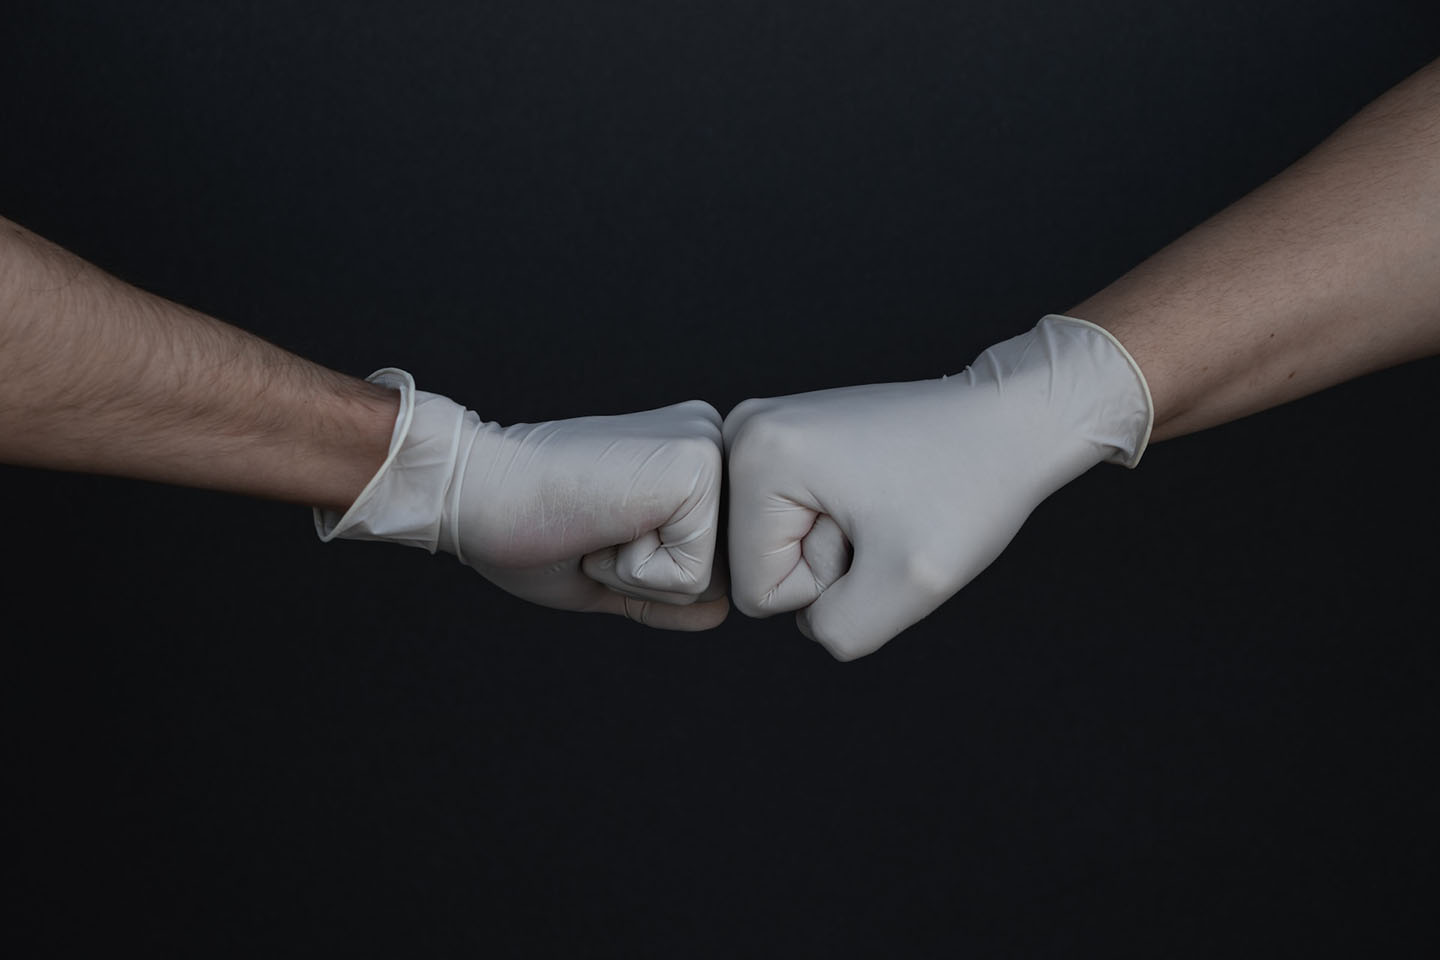 two persons wearing white gloves bump their fists together